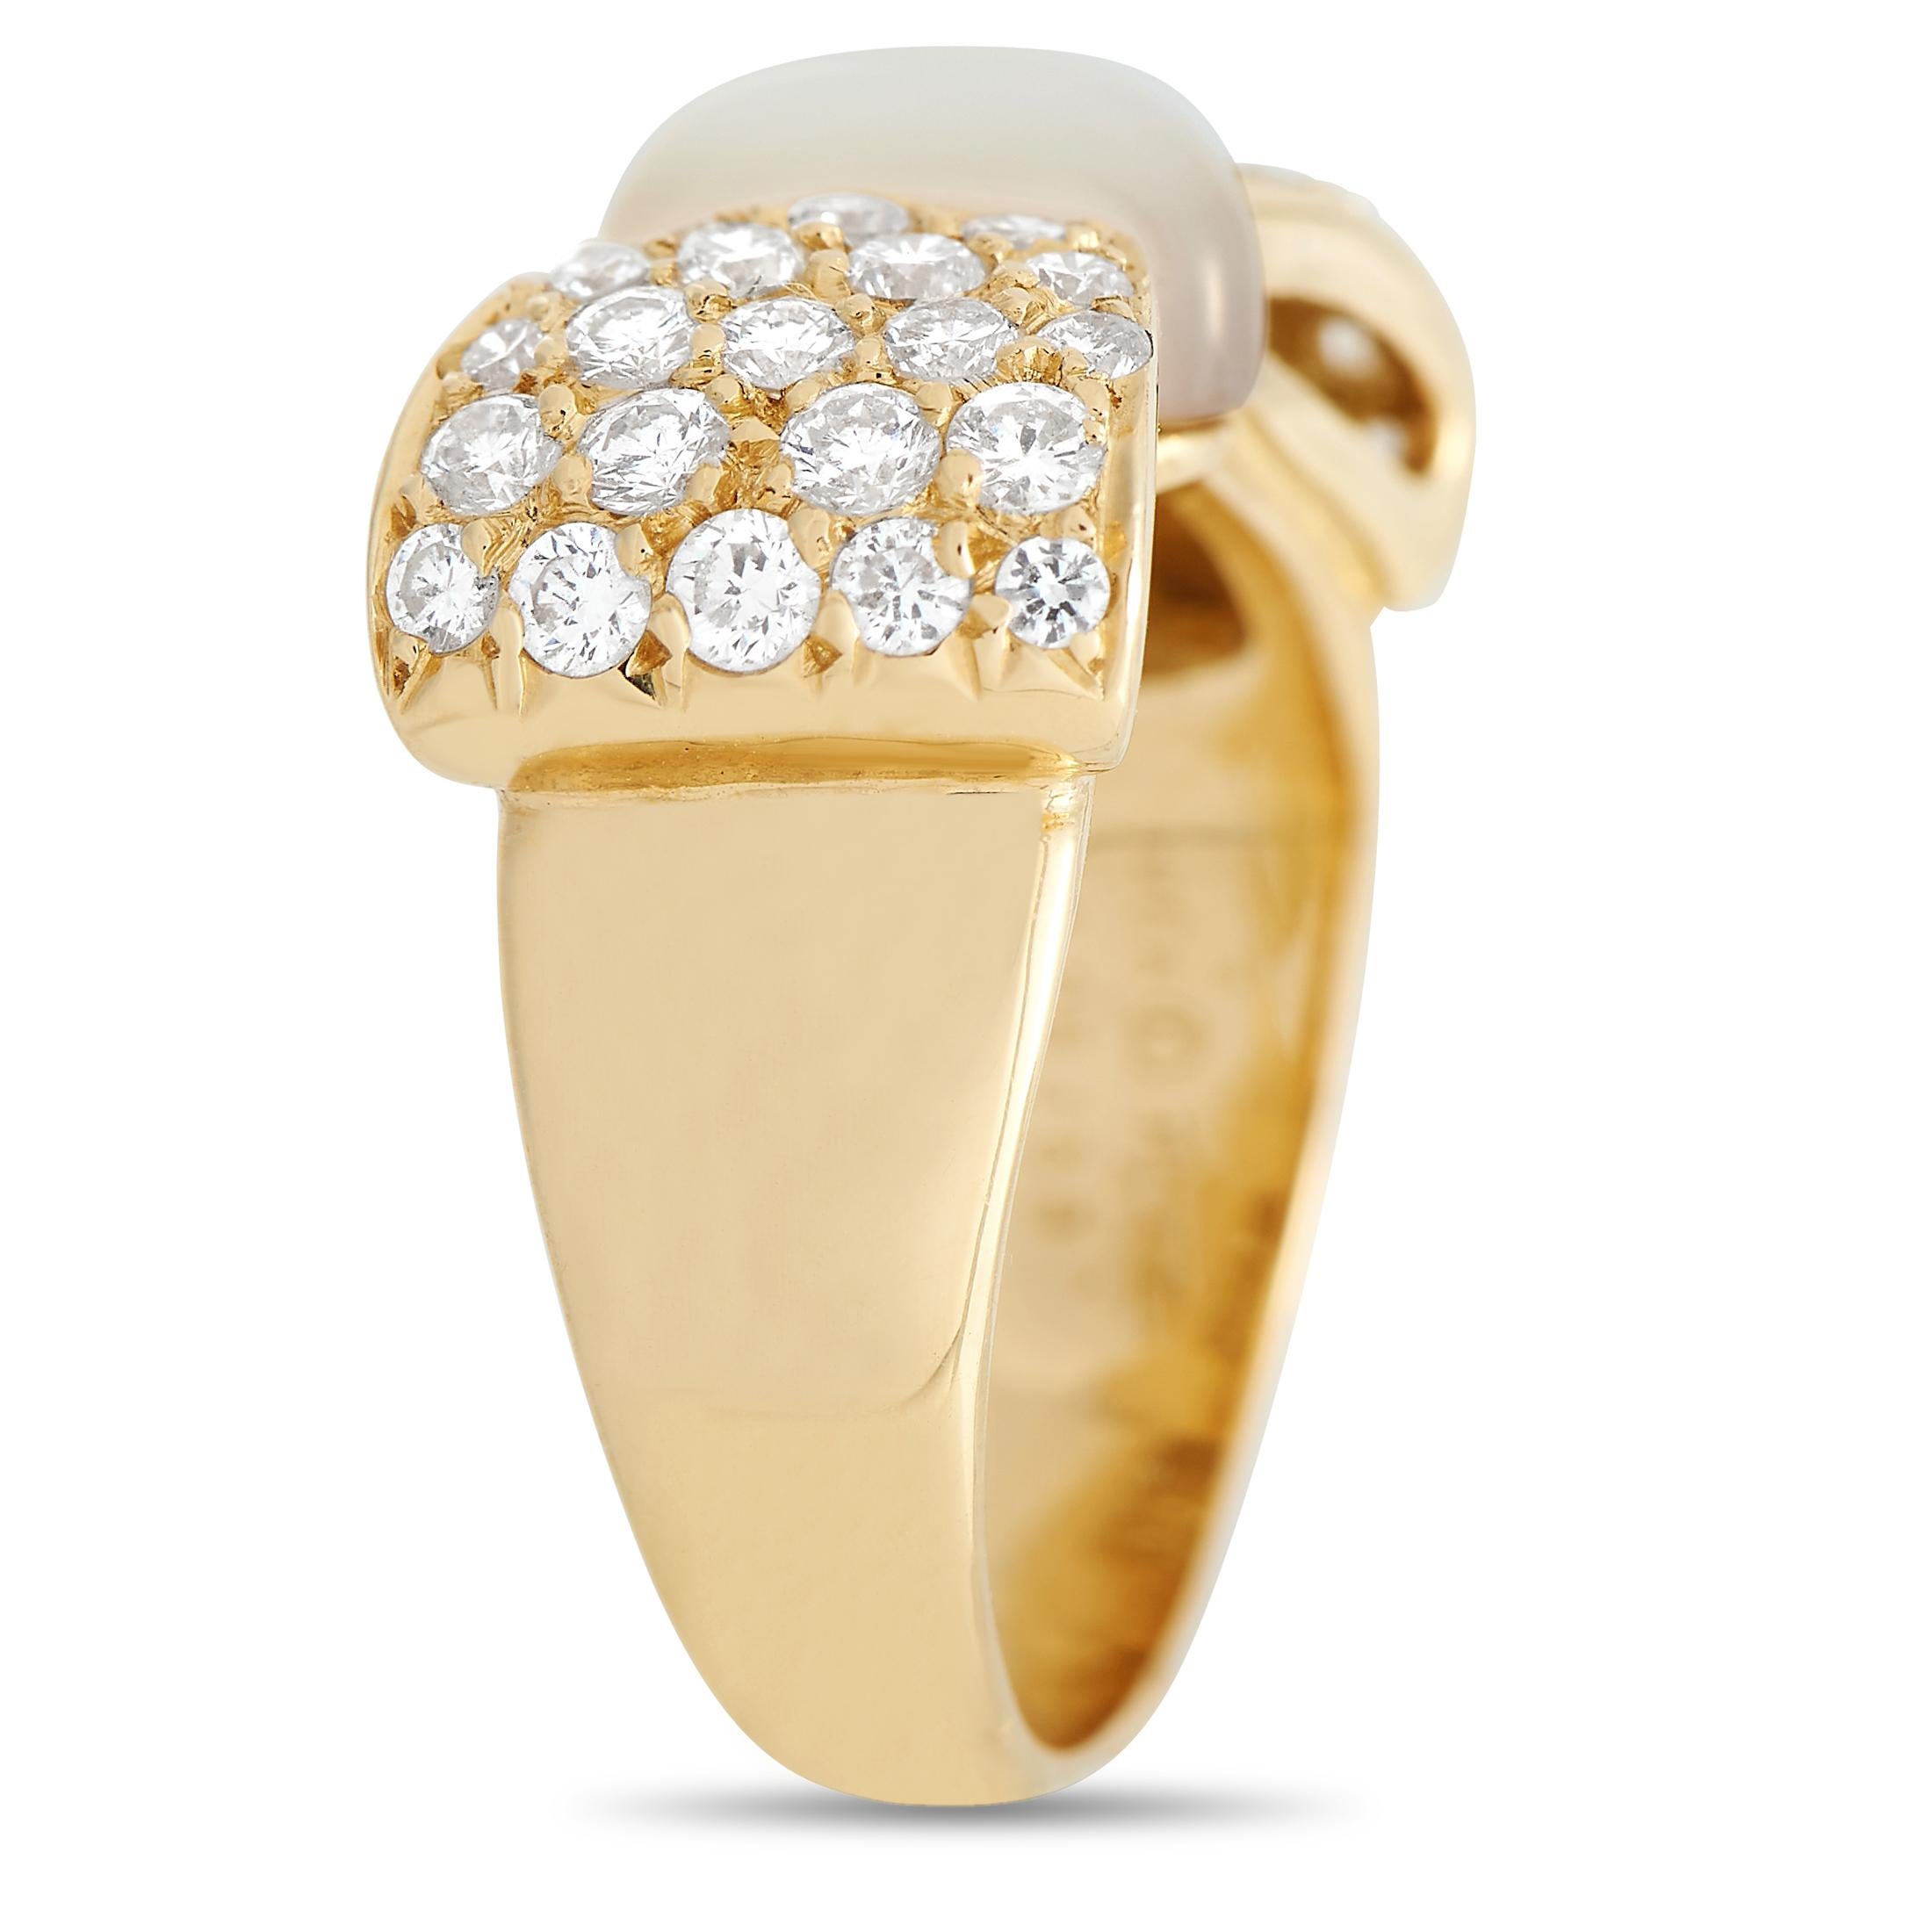 This ladylike ring from Van Cleef & Arpels is ideal for anyone with a feminine aesthetic. Its opulent 18K Yellow Gold setting - which is meant to resemble a bow – comes to life thanks to 0.75 carats of sparkling Diamonds and an elegant Mother of